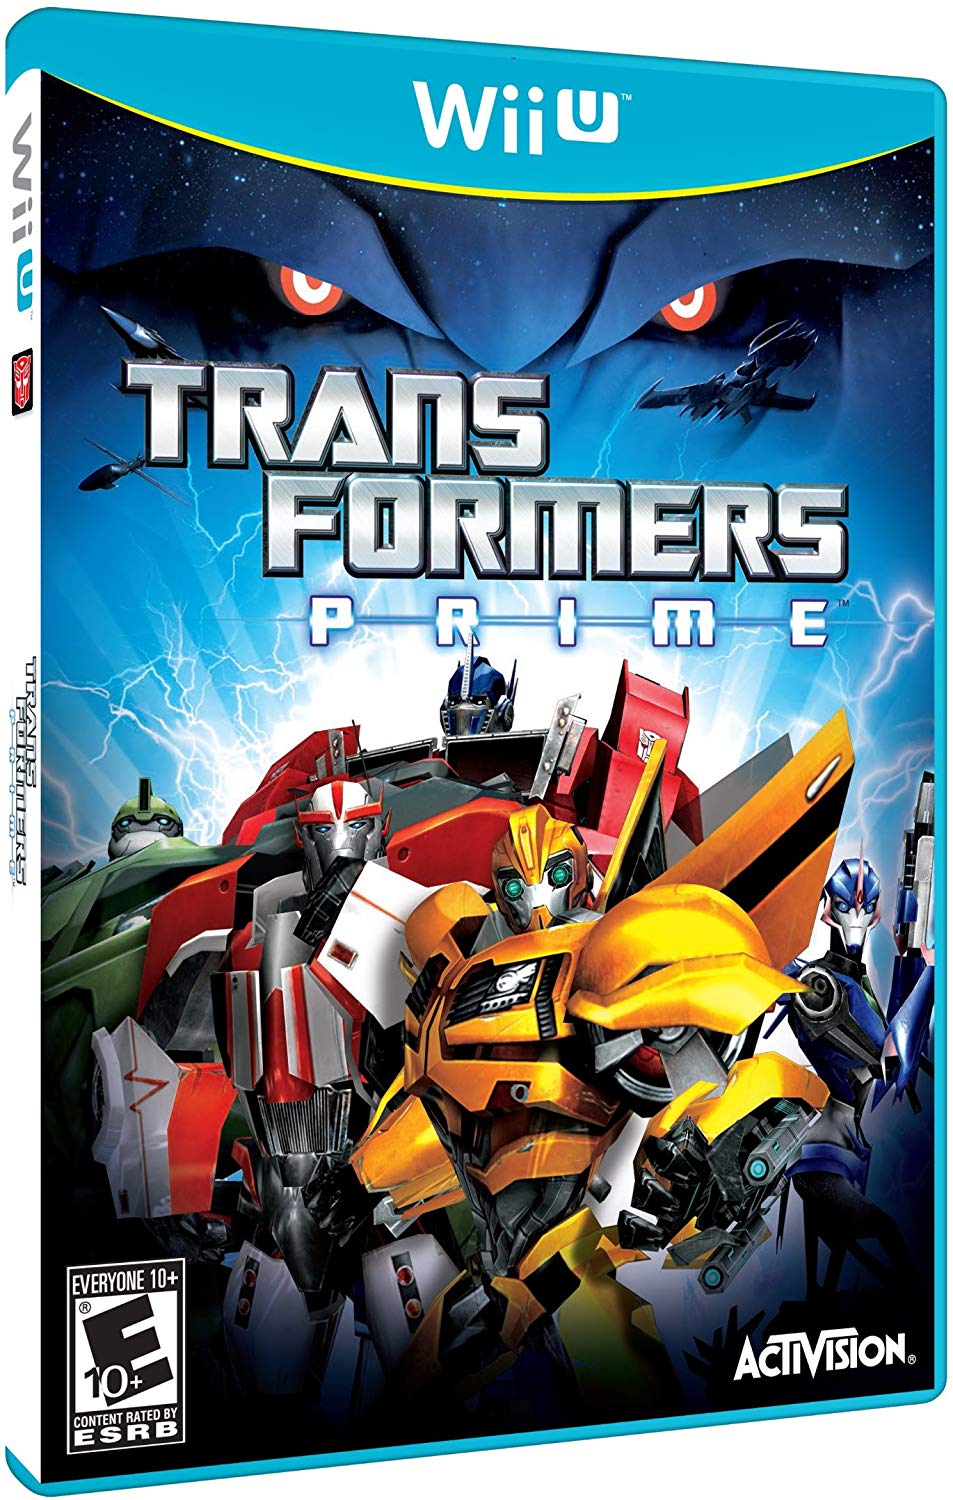 Steve Blum recommends Transformers Prime: The Game for Wii U